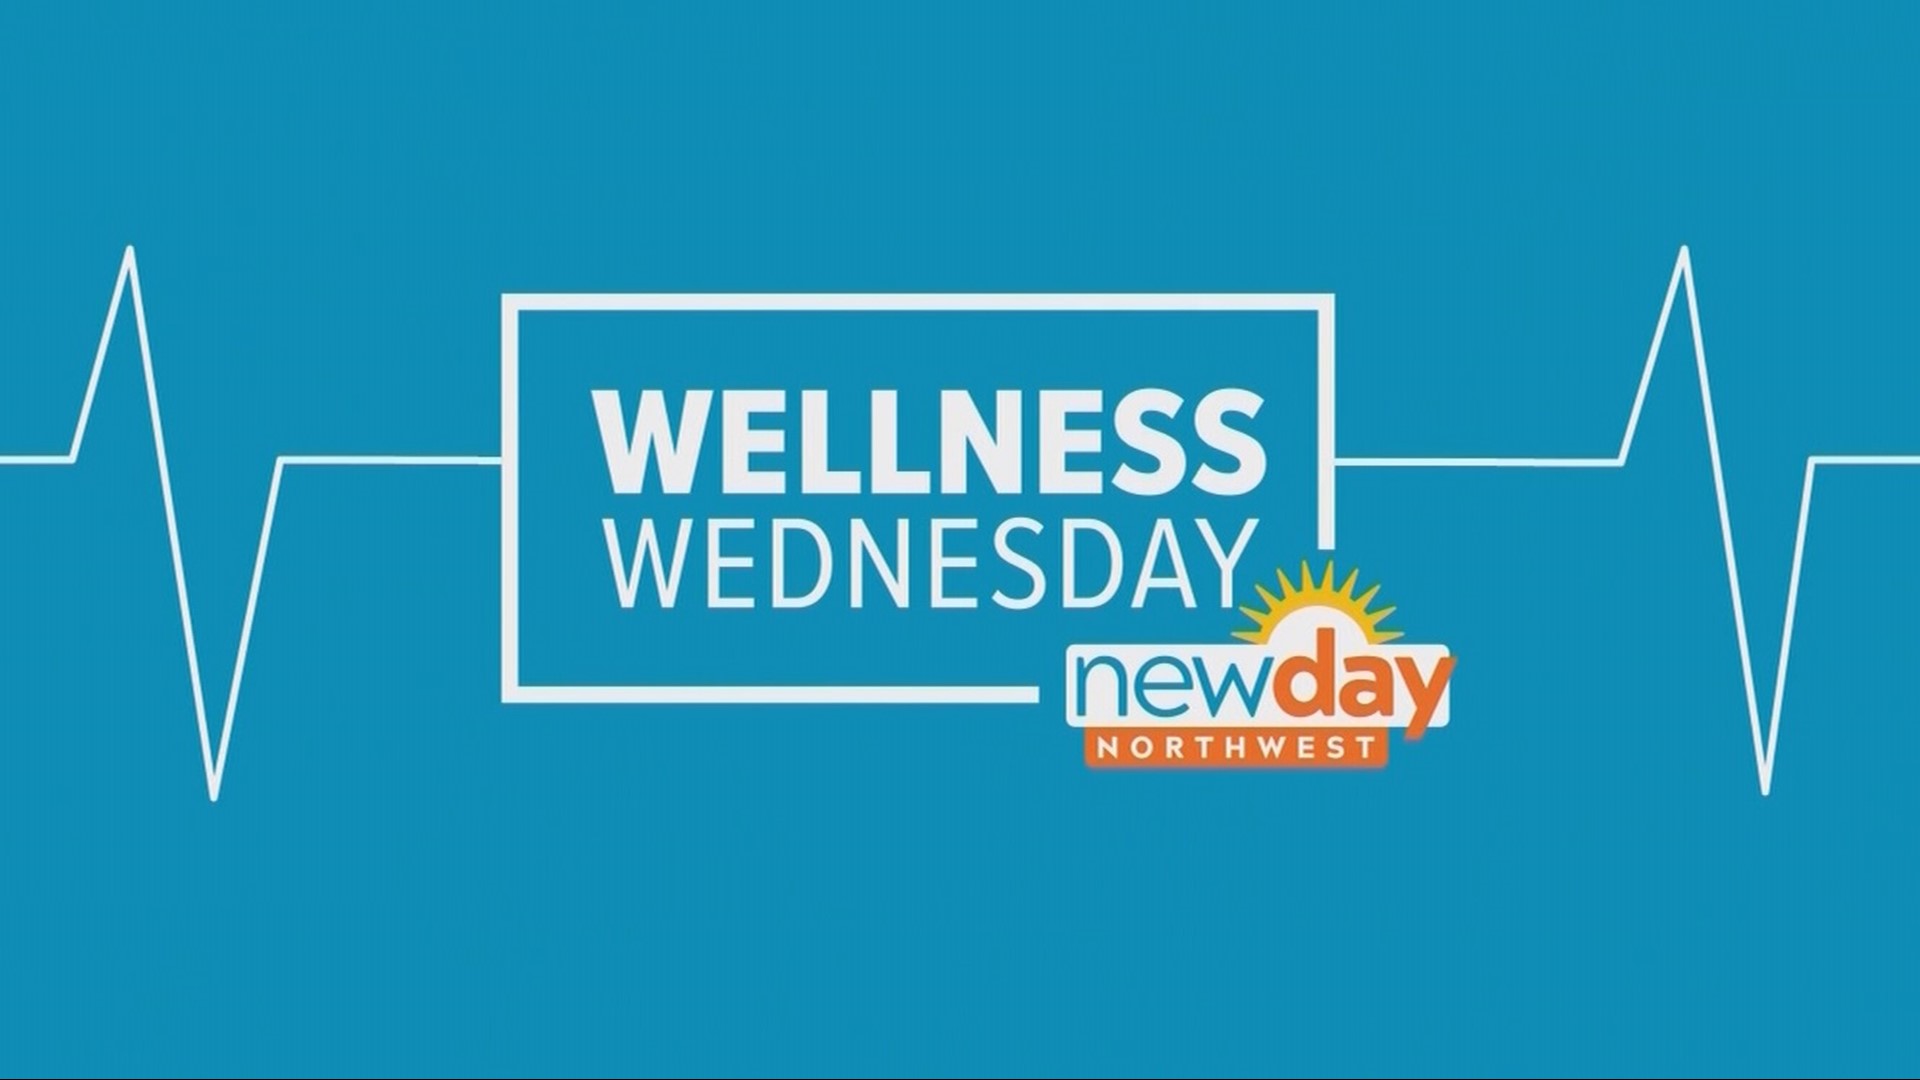 Wellness Wednesday panel discussion with experts from UW Medicine, Longevity Medical Clinic, Hotel California by the Sea Bellevue and Skinny Seattle.